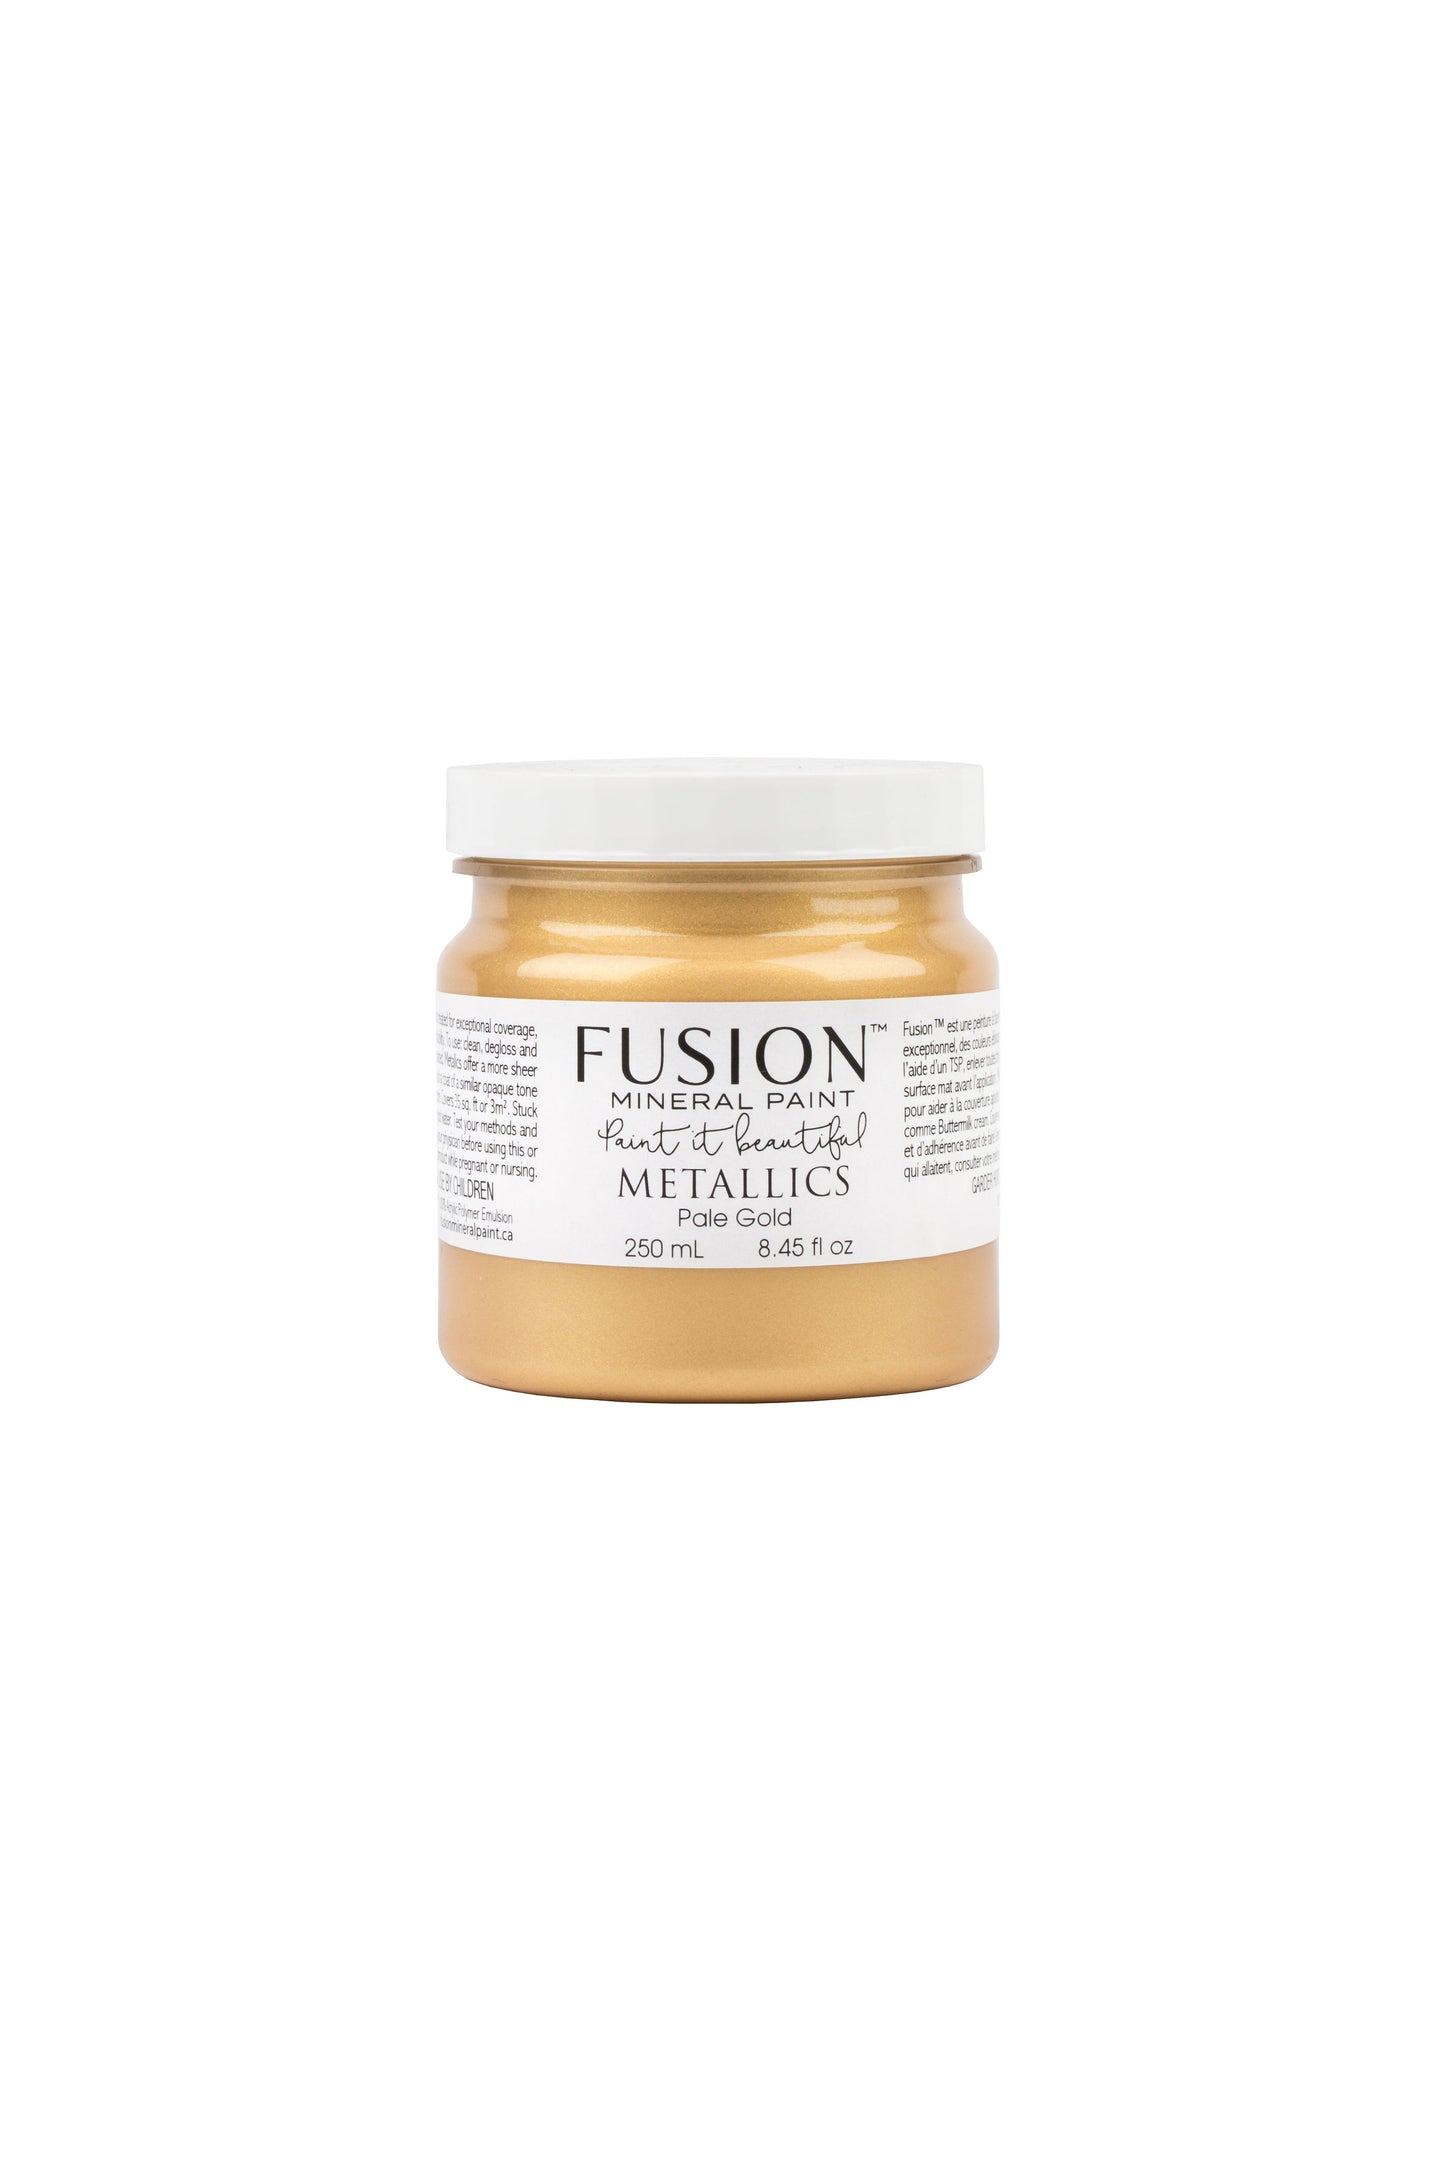 Pale Gold - Fusion Mineral Metallic Paint